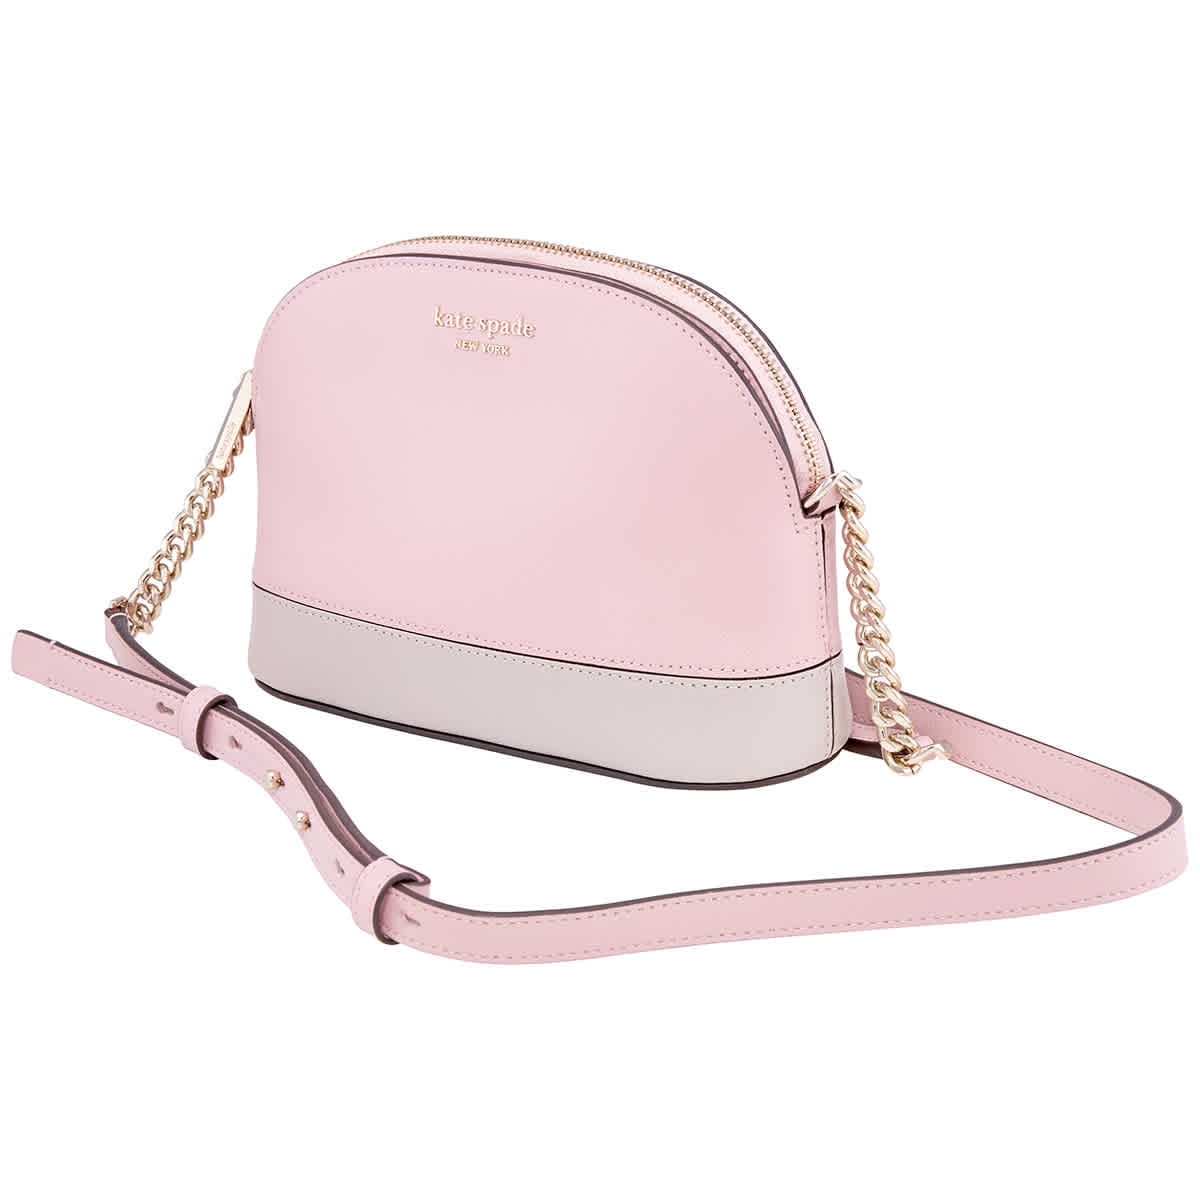 Kate Spade Spencer Small Dome Leather Crossbody